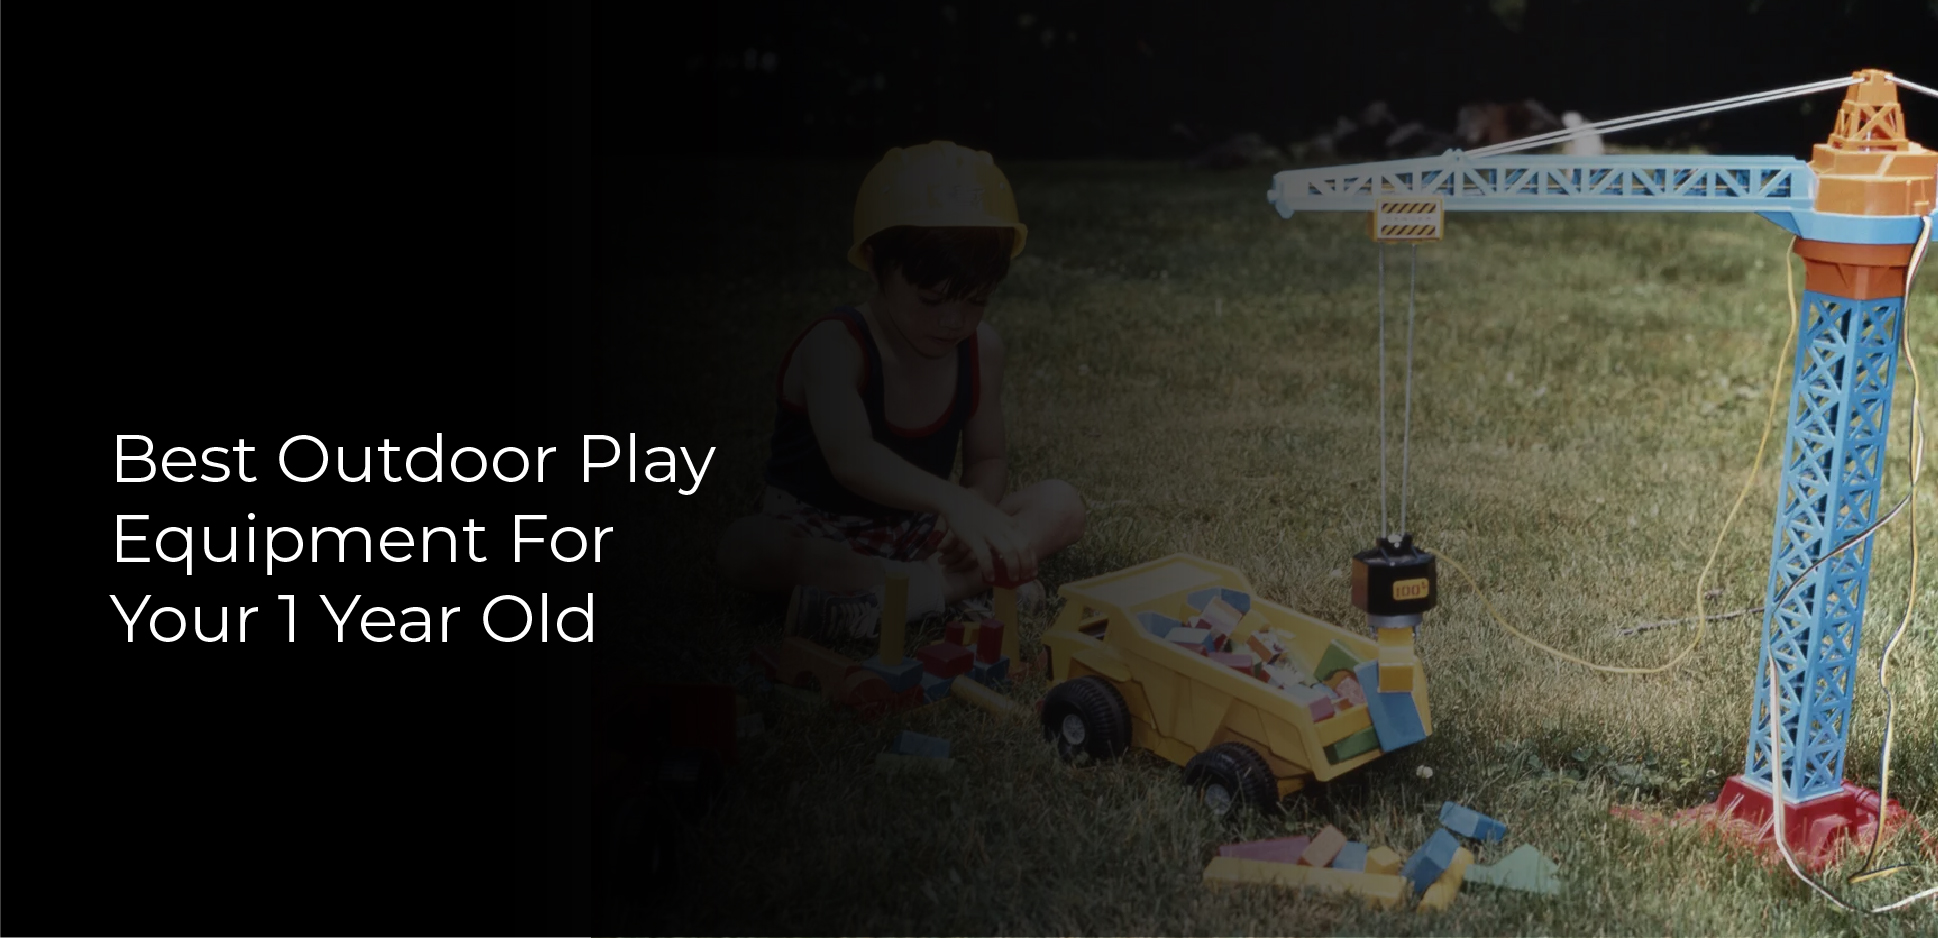 best outdoor play equipment for 1 year old